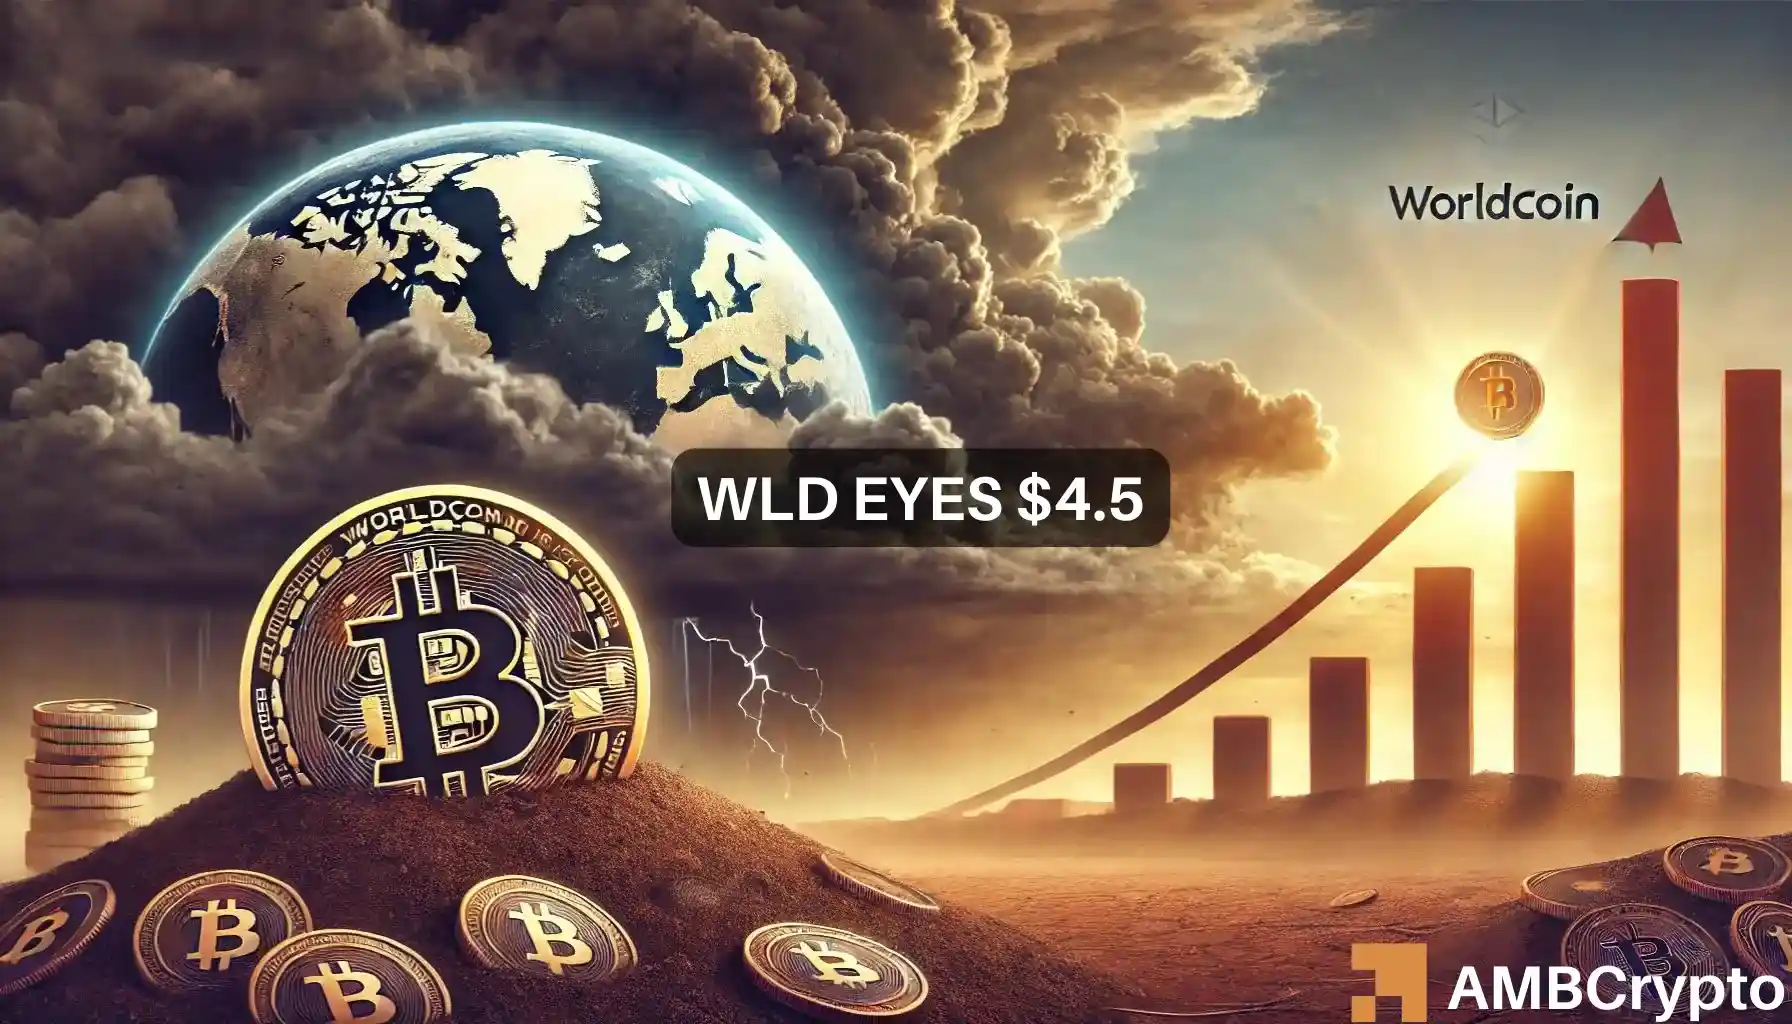 Worldcoin soars 89%: Is a repeat of February’s rally likely?